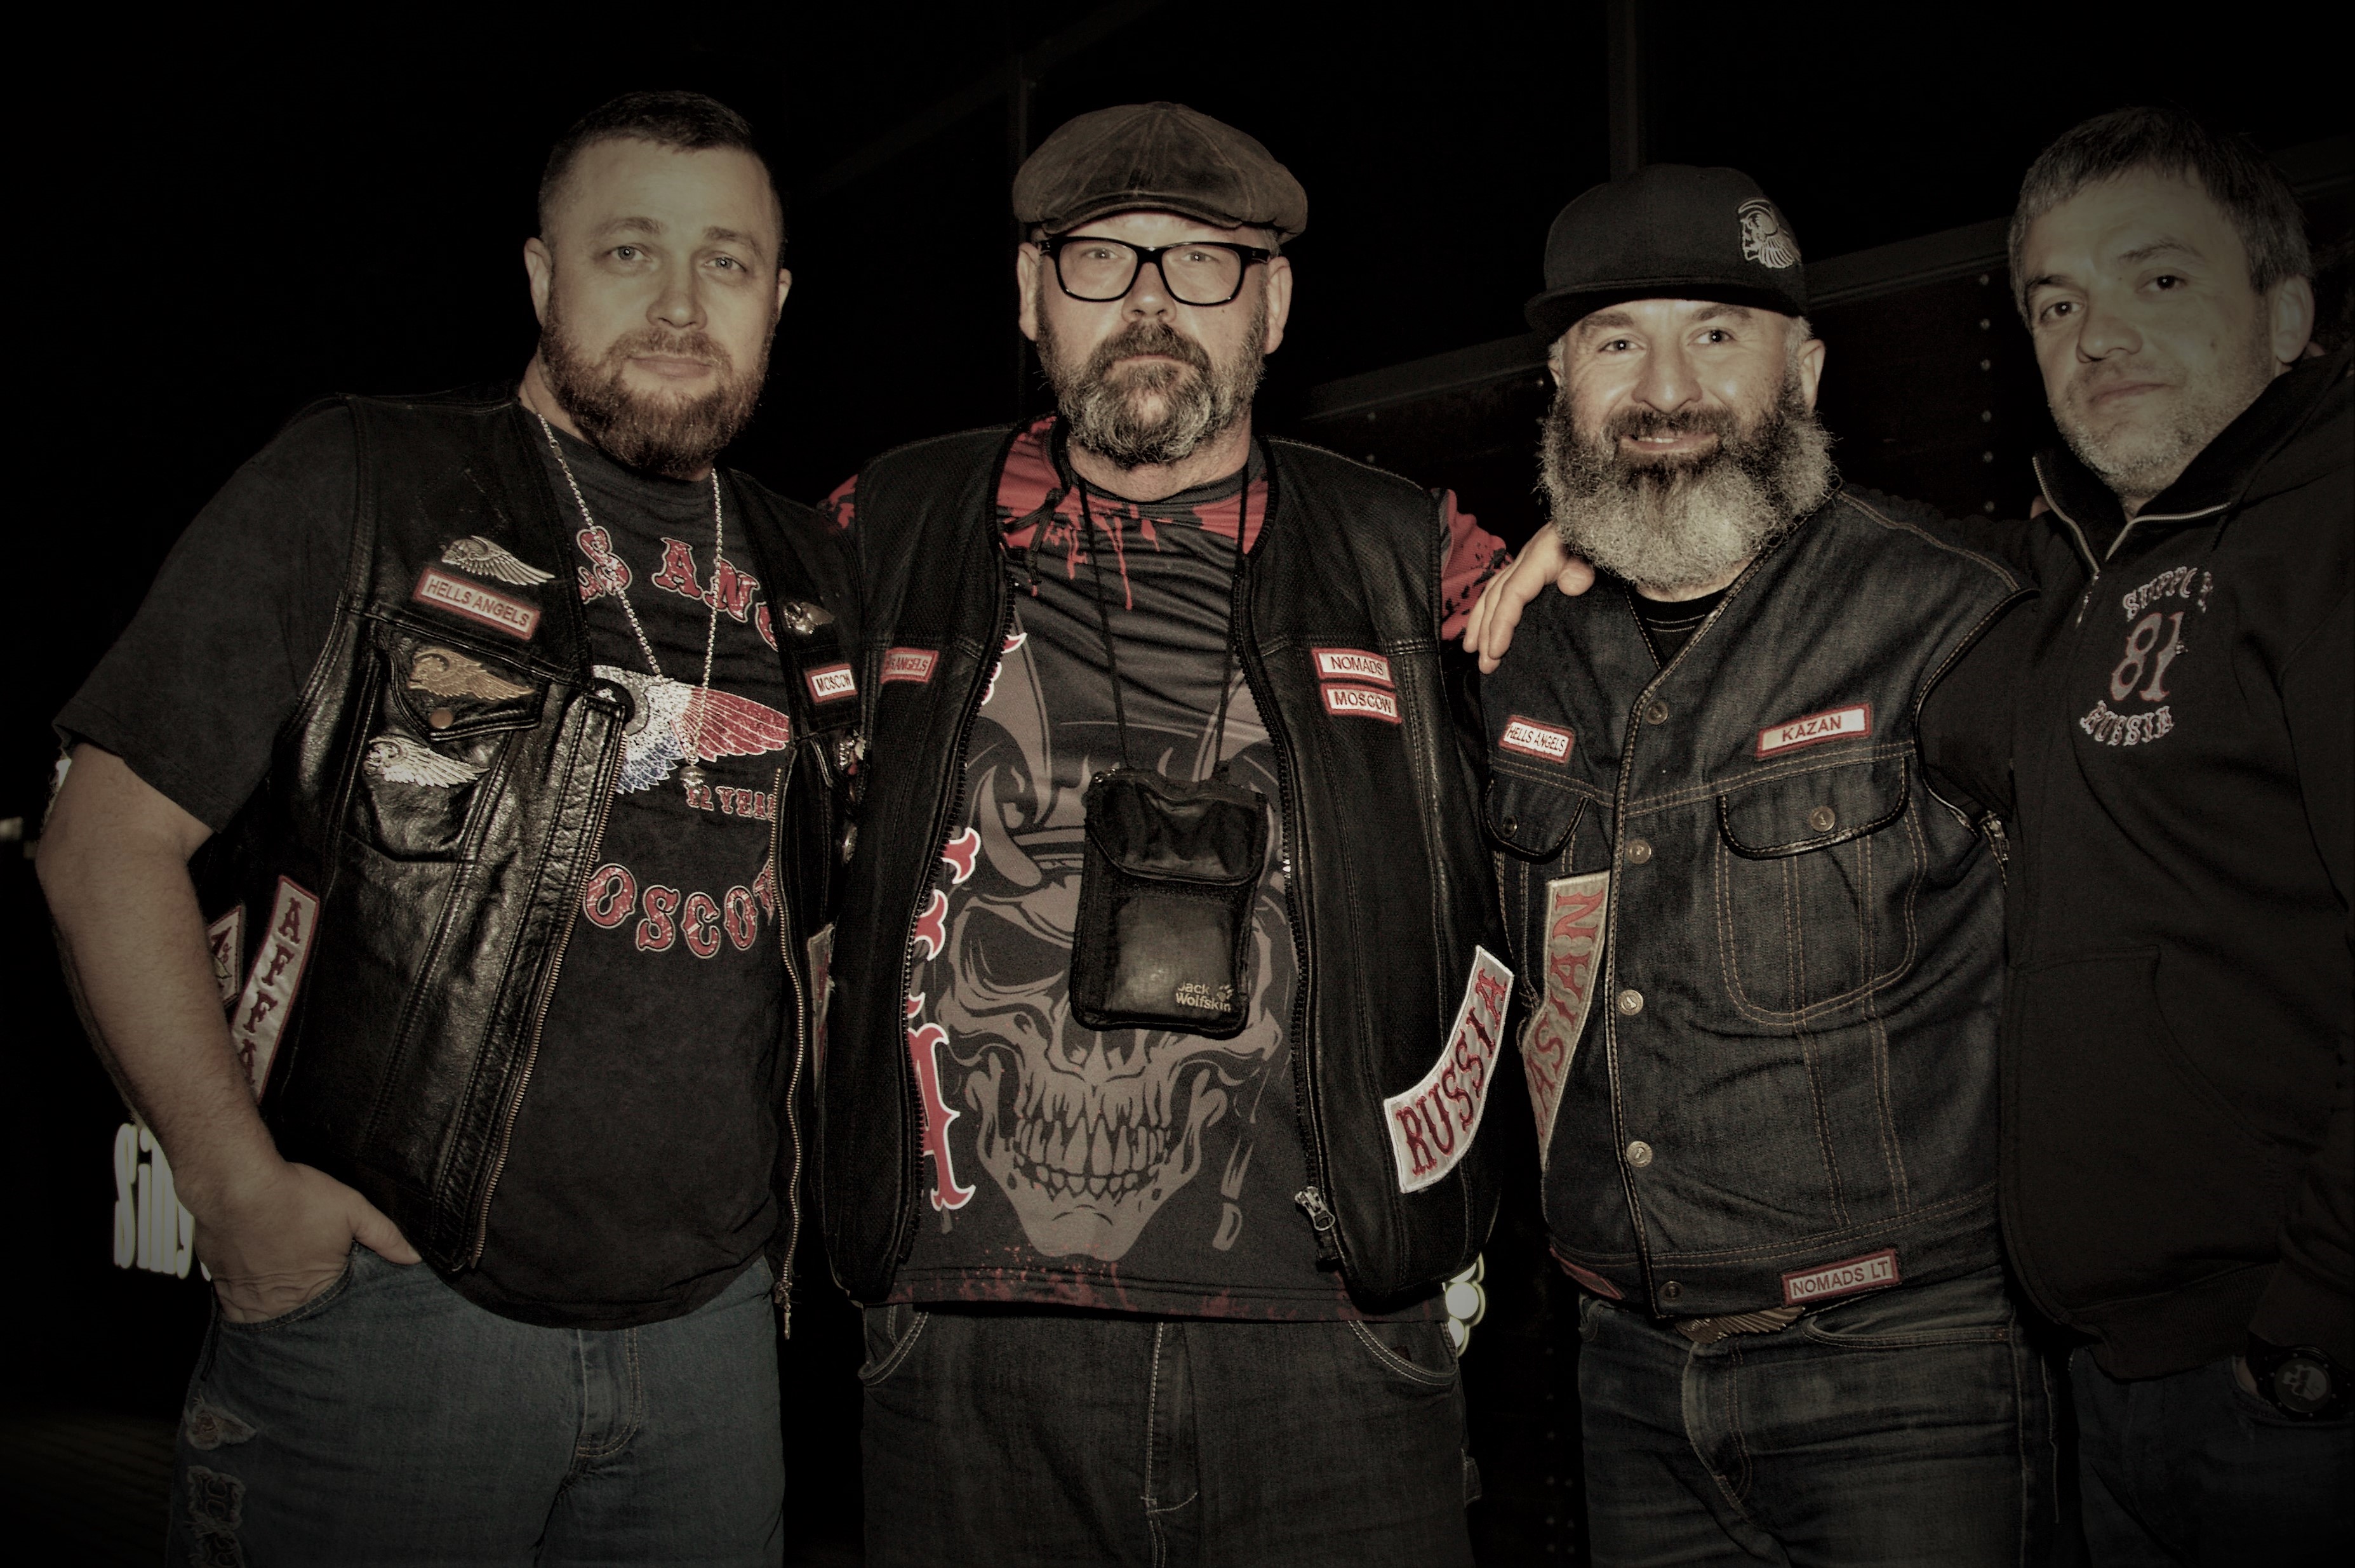 HELLS ANGELS MOSCOW 12 YEARS Hells Angels MC Moscow.